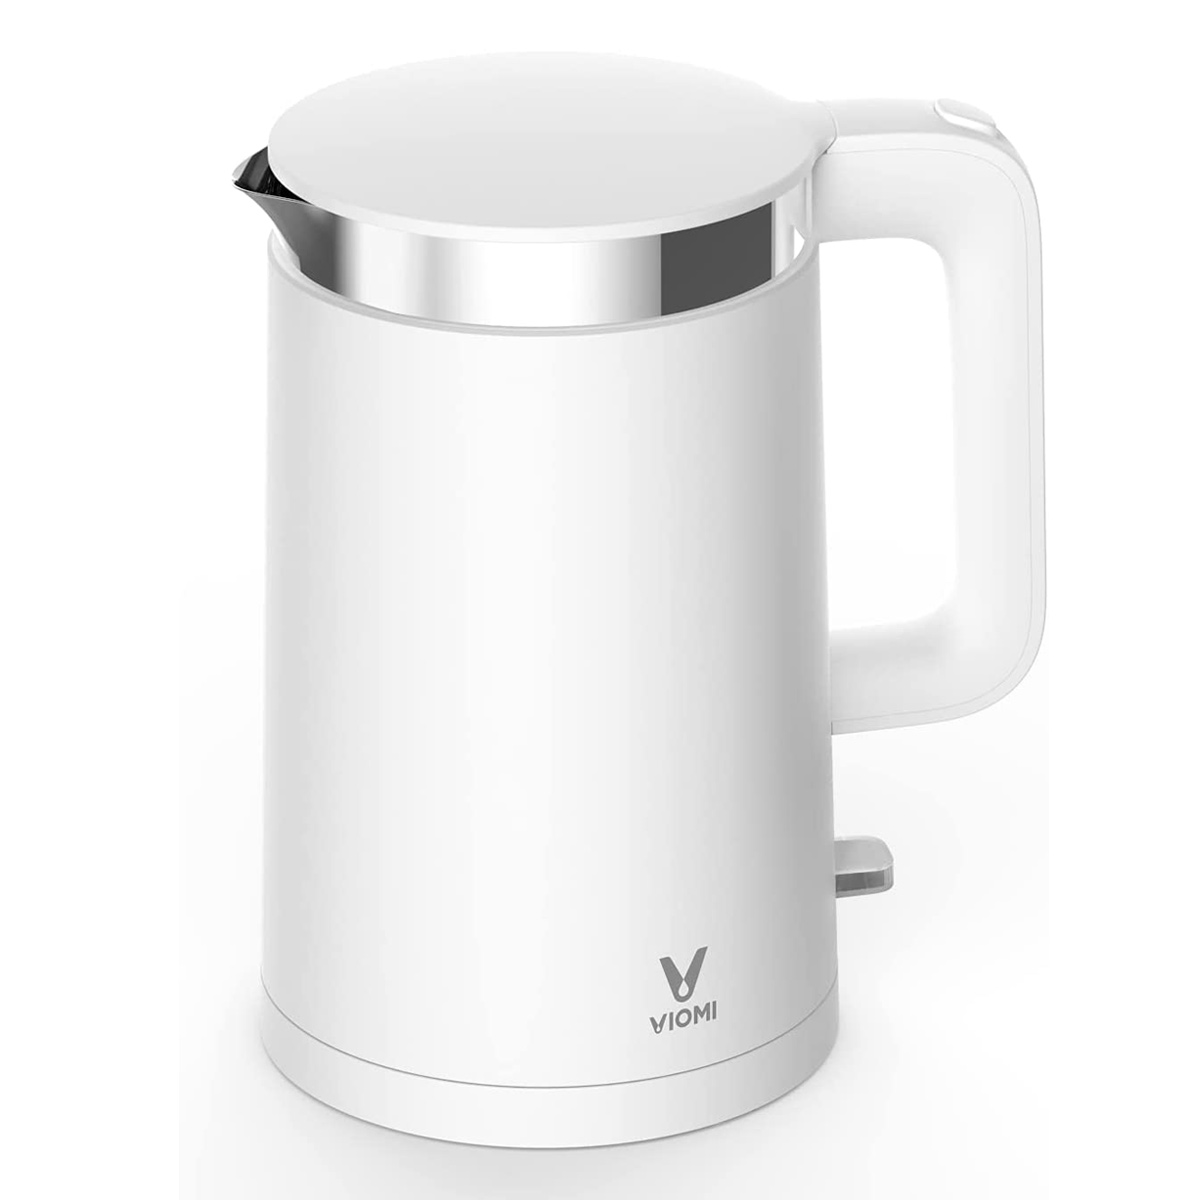 Viomi Smart Kettle – the rise of the machines (review)